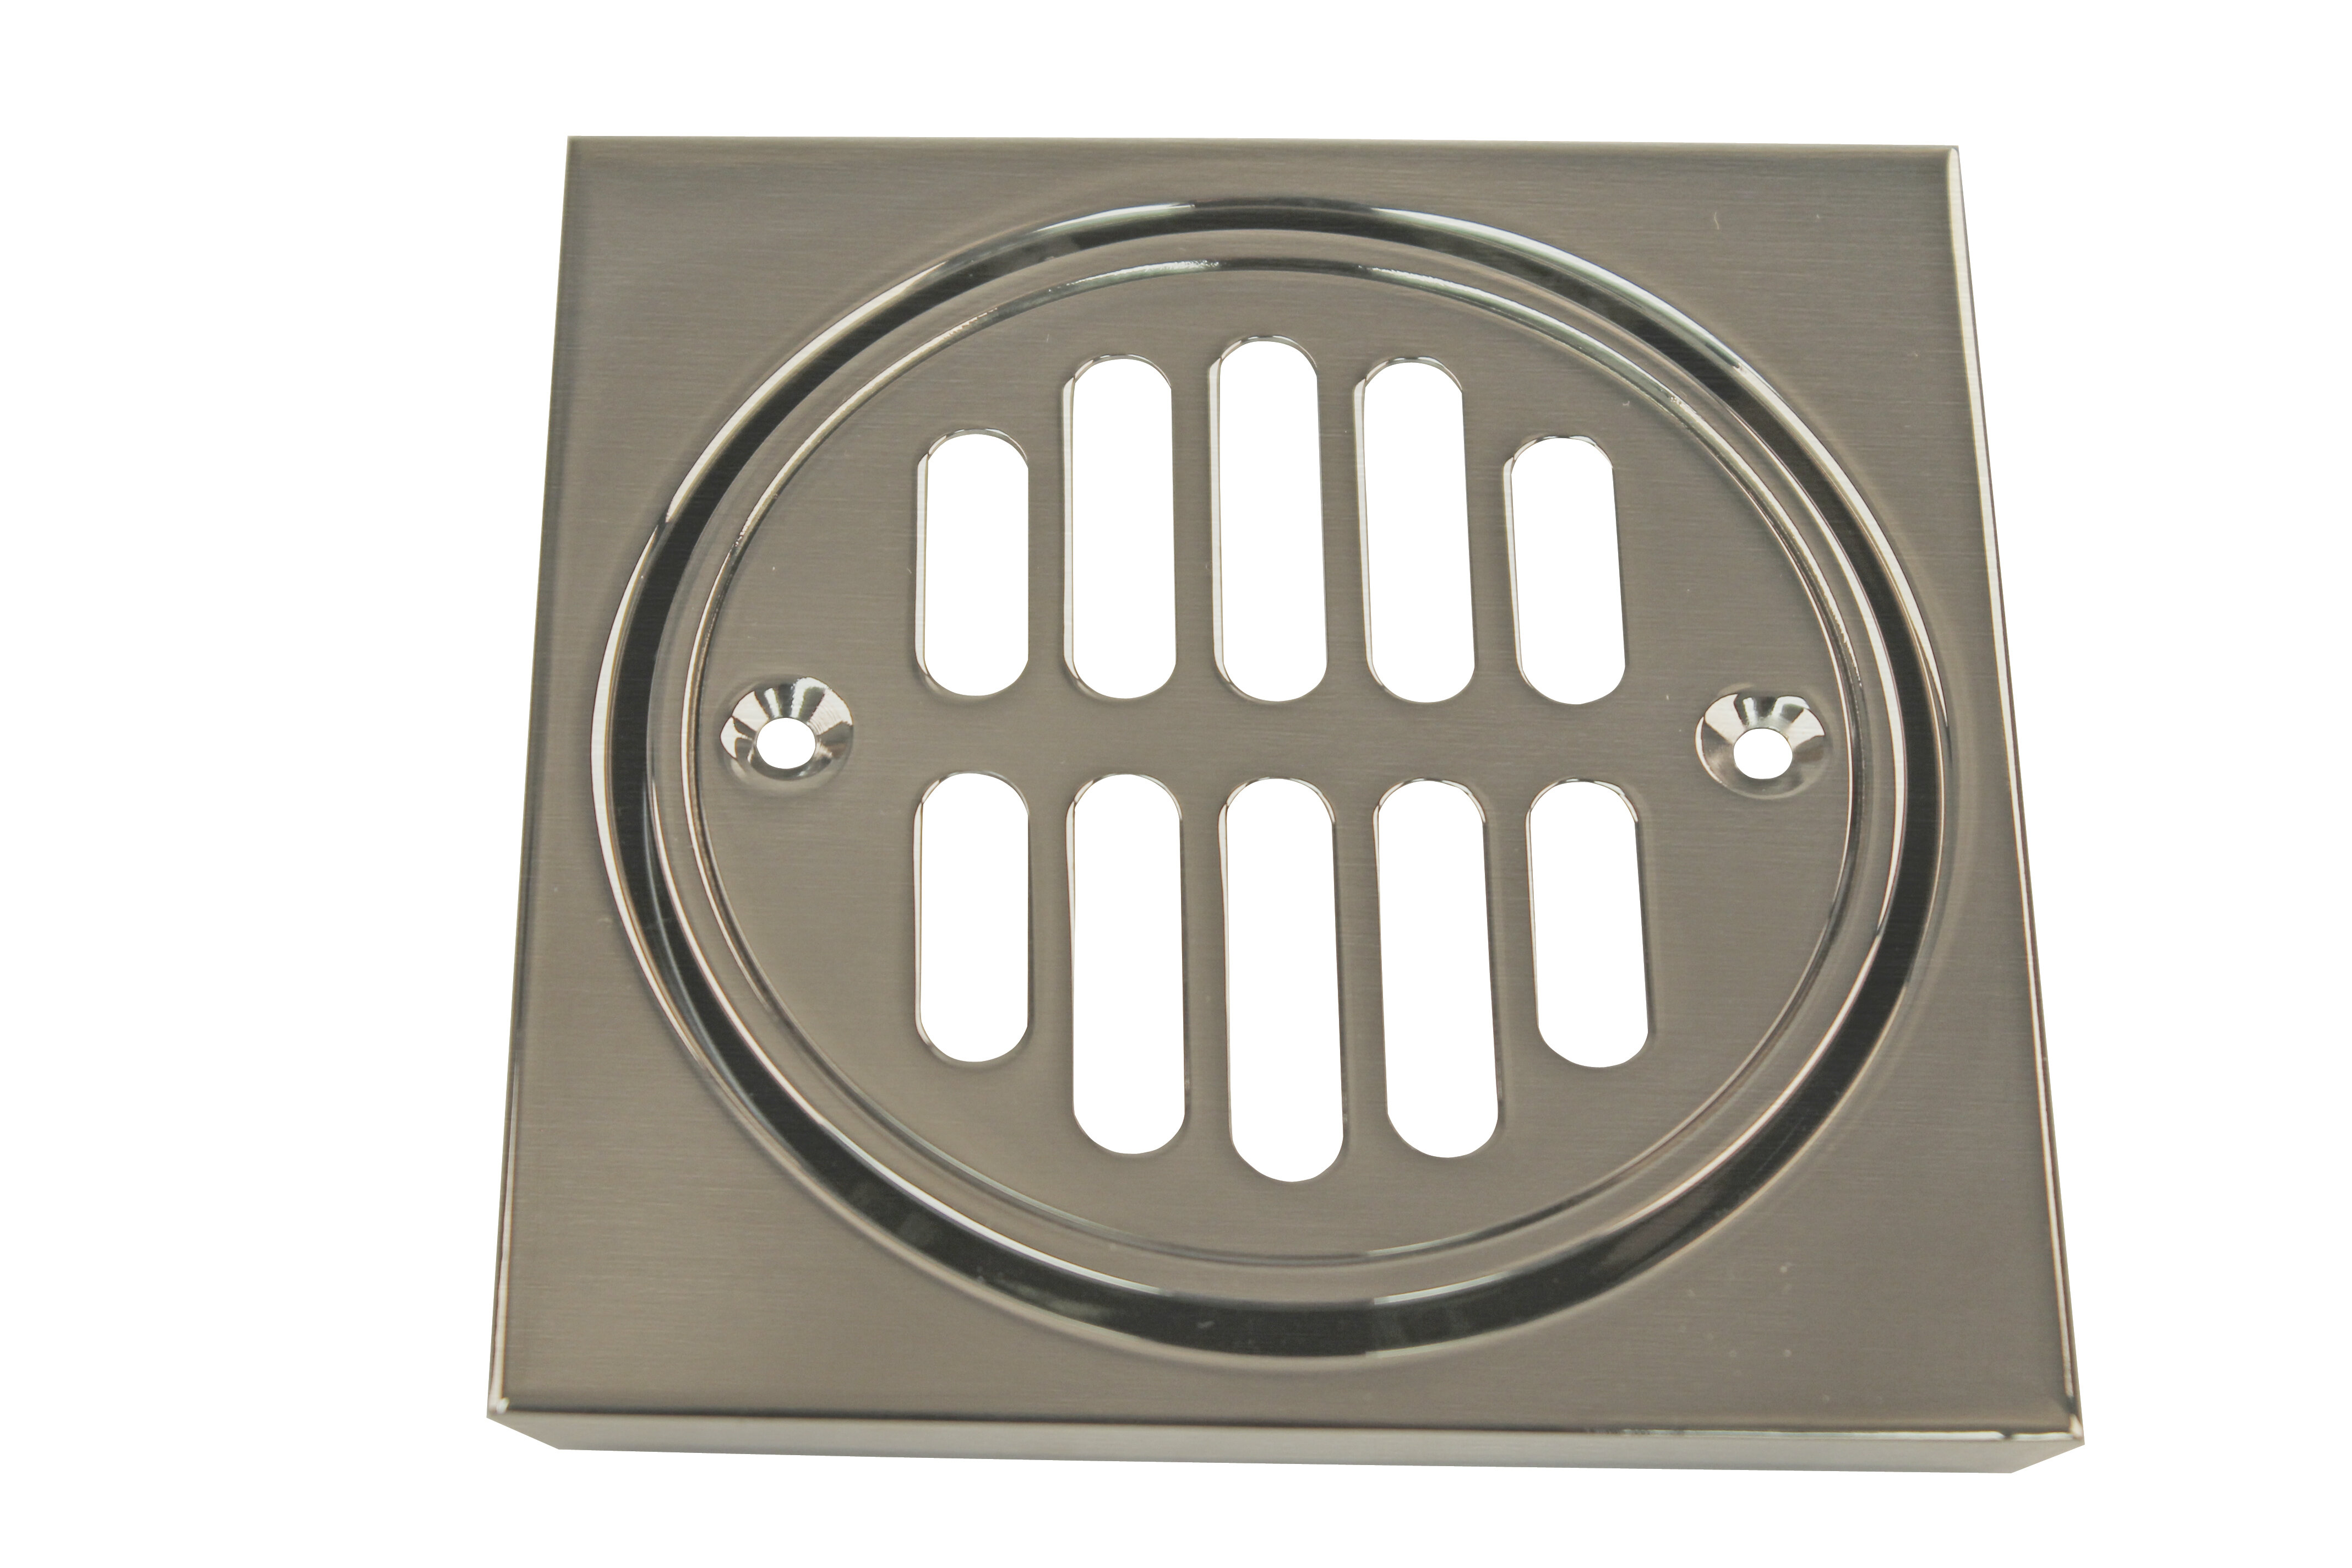 Shower Square Drain 4 inch - 2 in 1 Reversible Tile Insert & Flat Grate Brushed Stainless Steel Finish